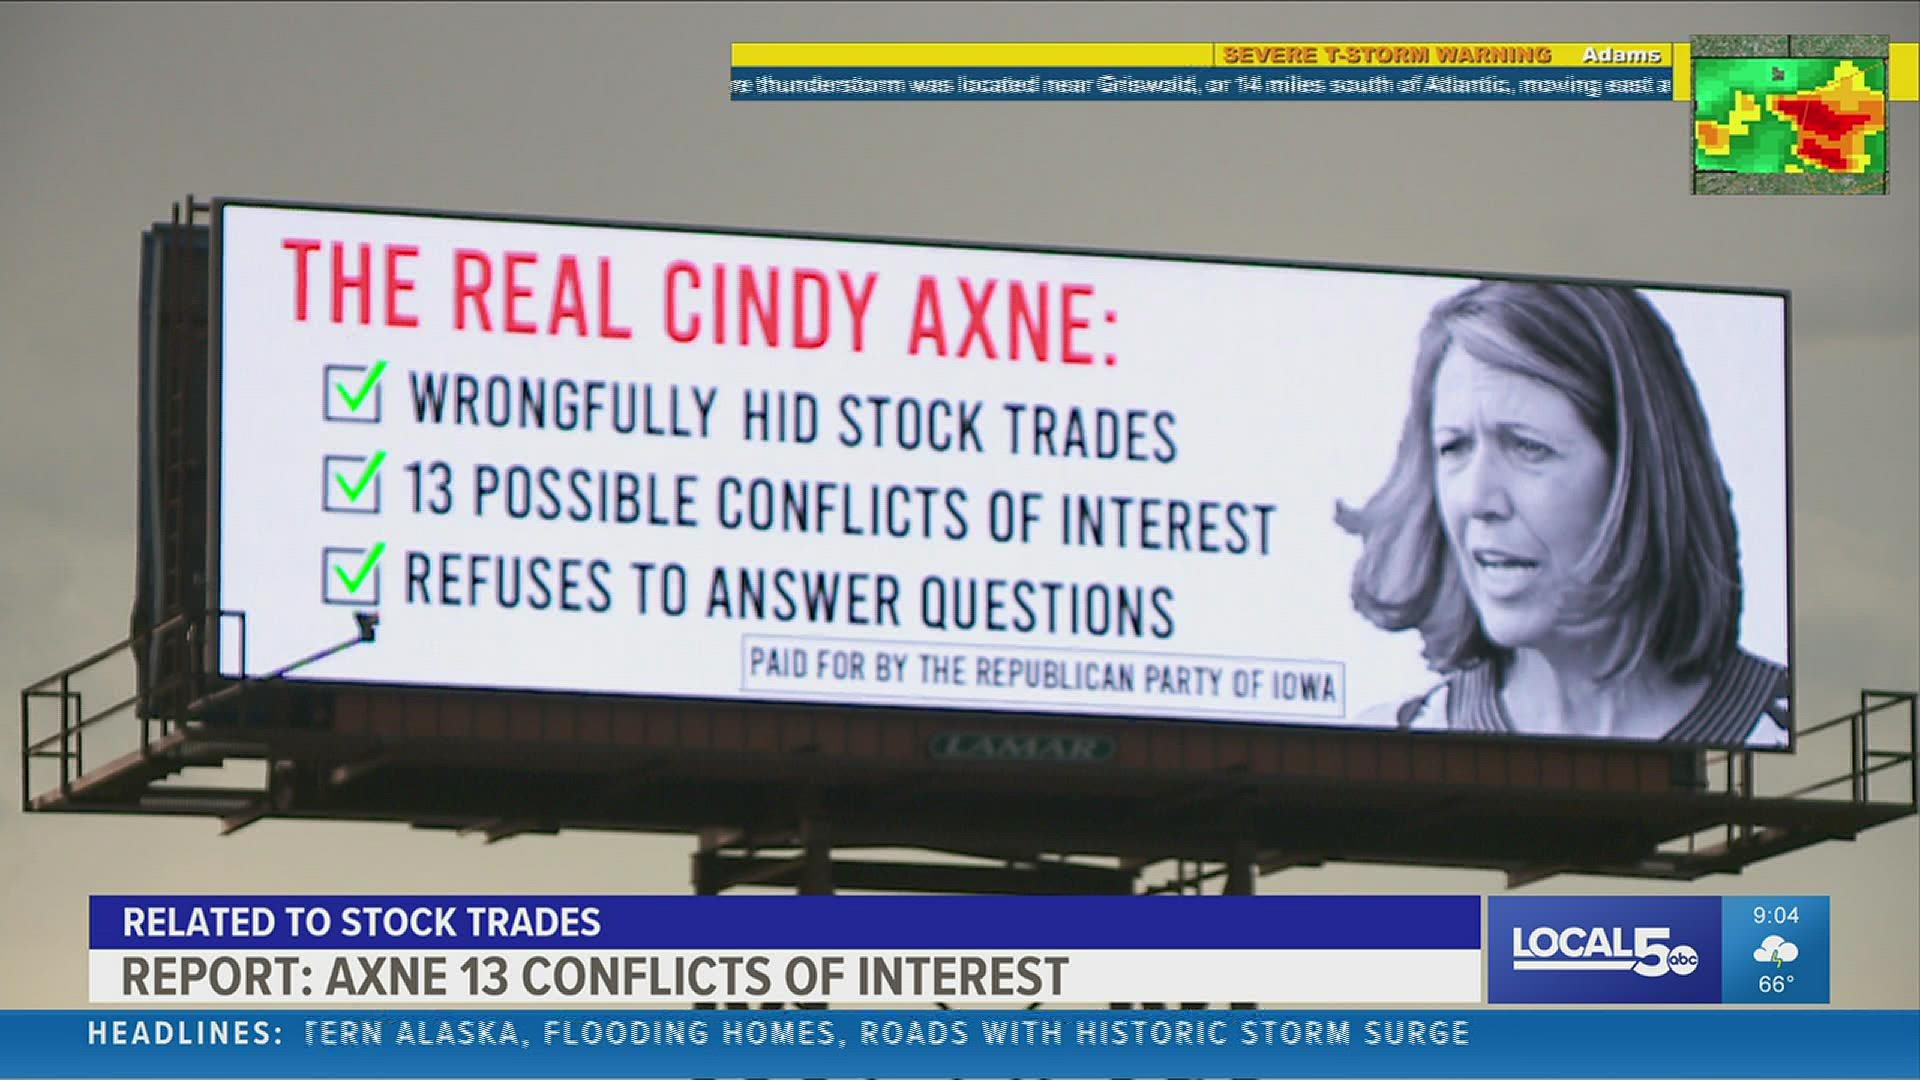 The billboard, paid for by the Republican Party of Iowa, references a recent report by the New York Times showing Axne has 13 possible conflicts of interest.